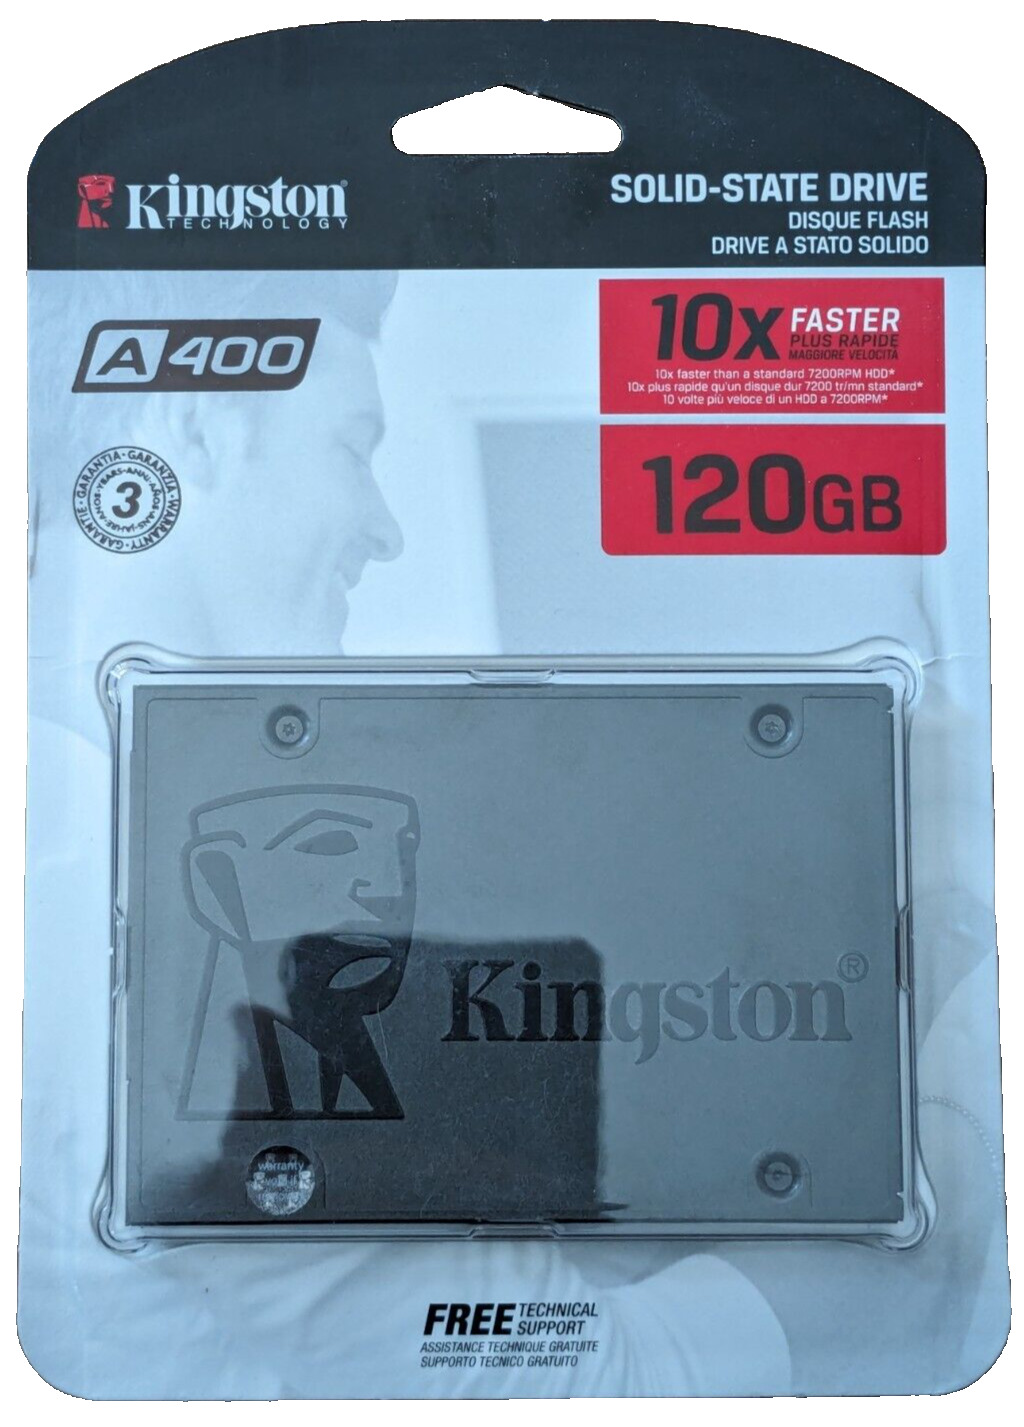 Kingston SSD A400 120GB Solid State Drive 2.5 inch SATA 3